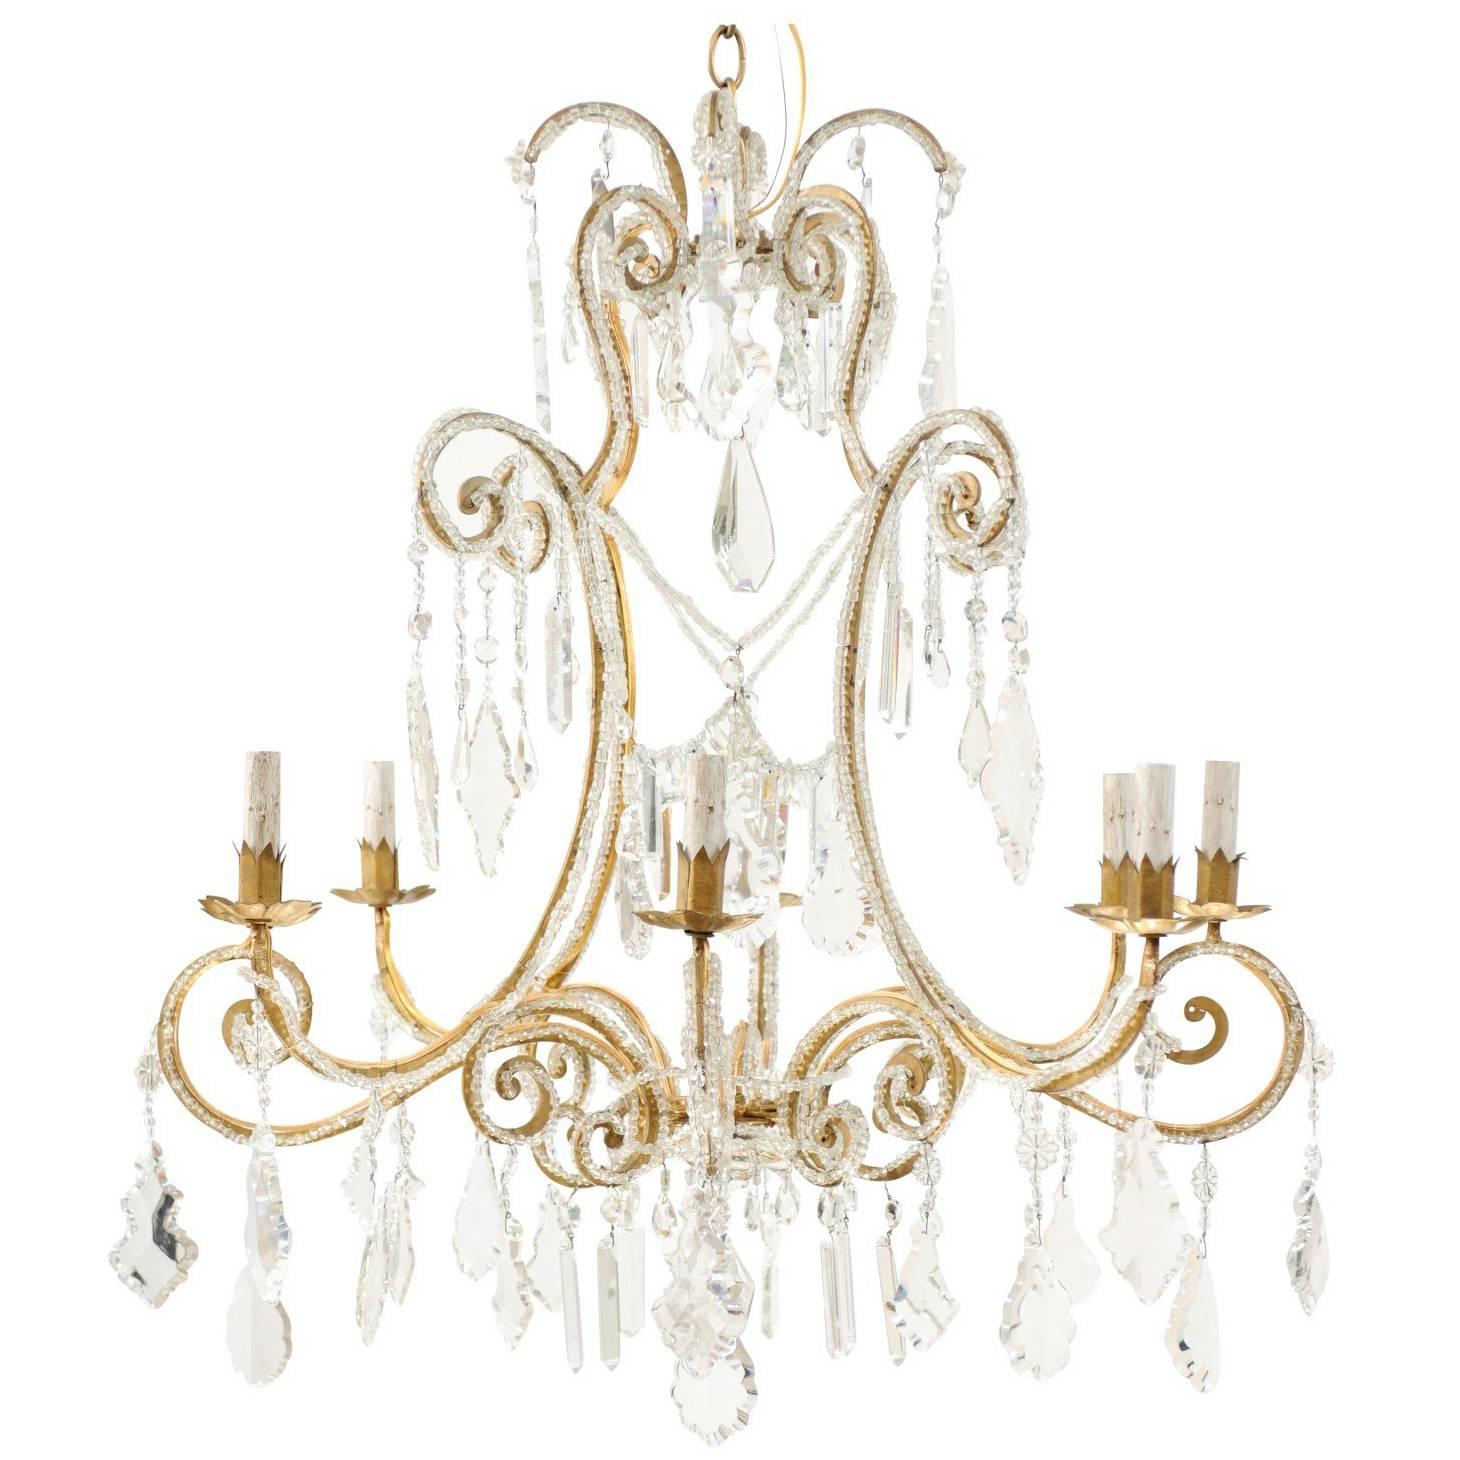 Italian Eight-Light Crystal and Gilded Iron Chandelier with Ornate Scroll Design